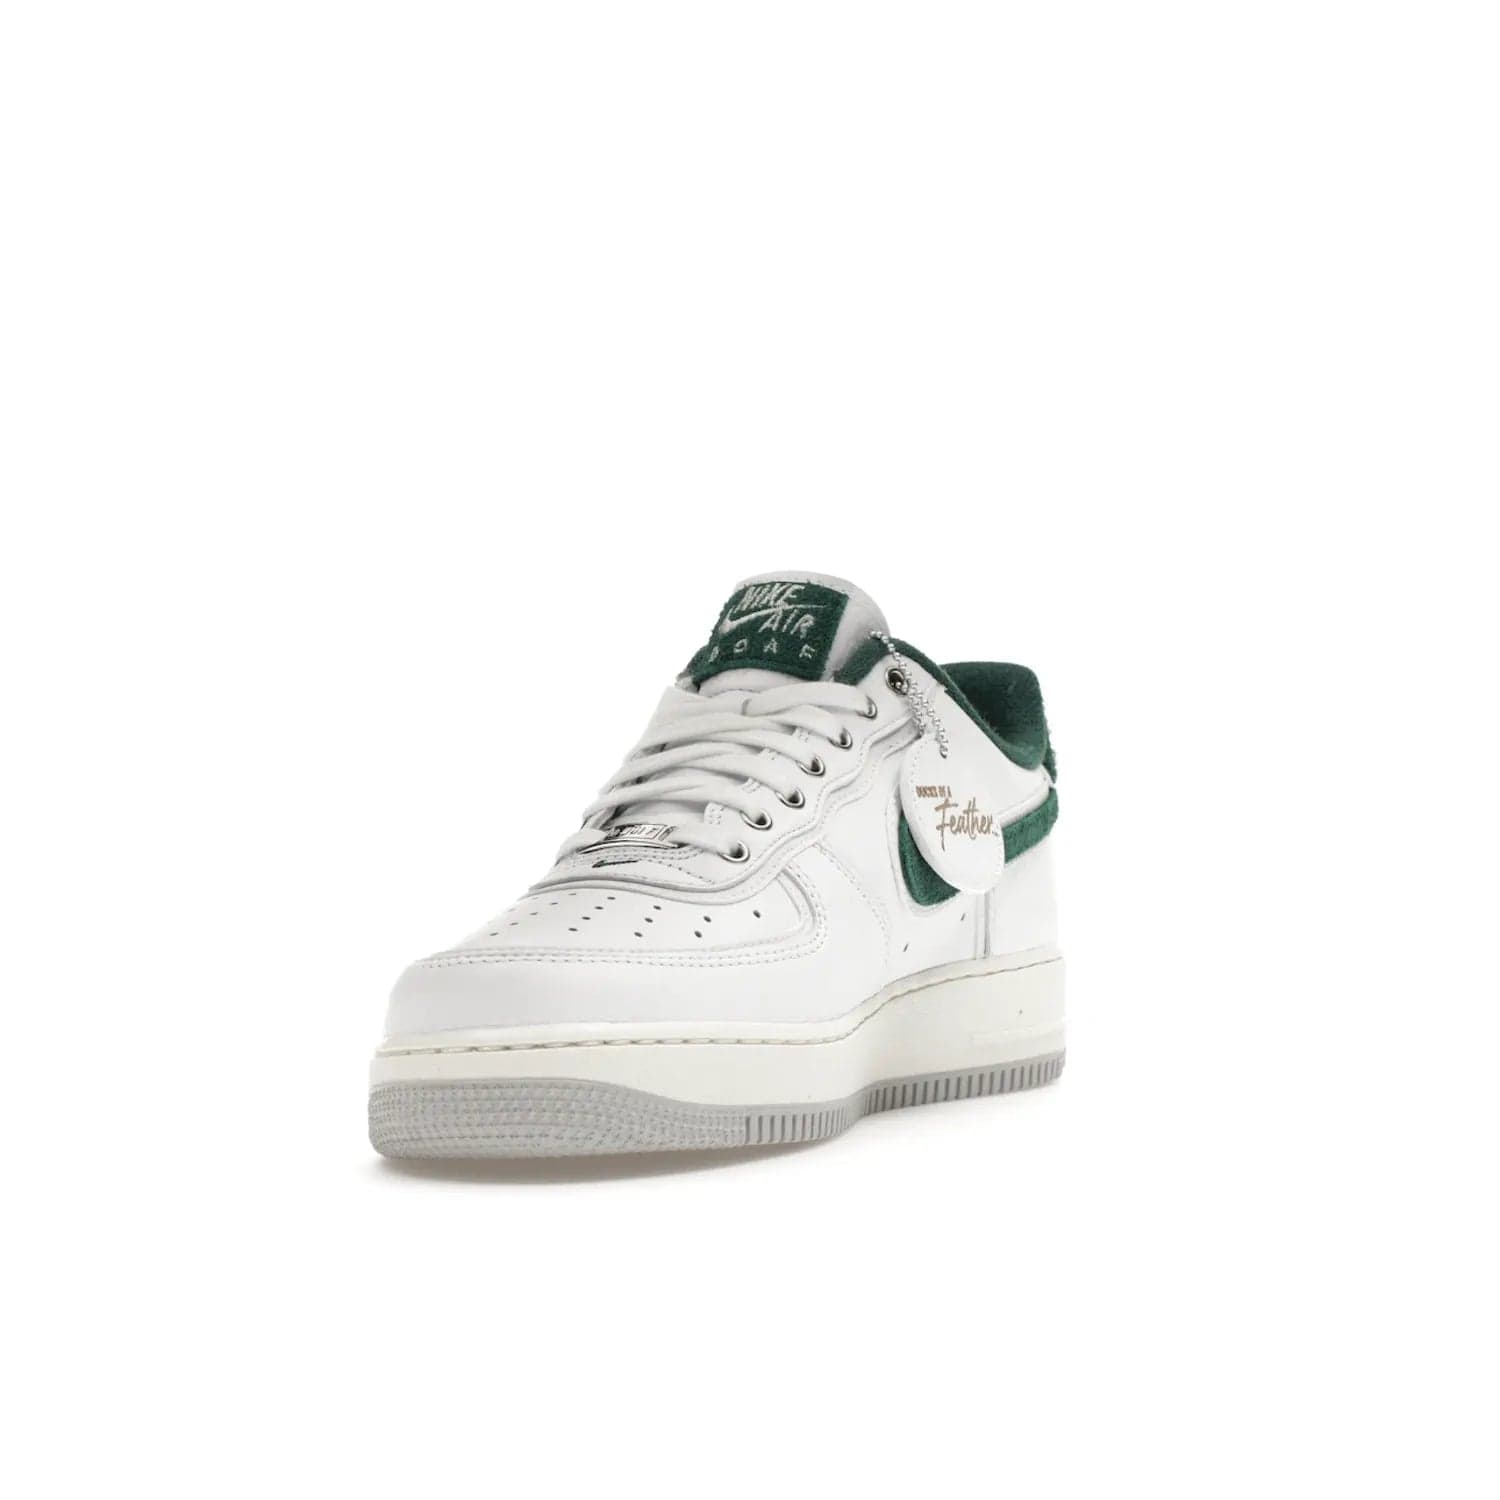 Nike Air Force 1 Low '07 Premium University of Oregon PE - Image 13 - Only at www.BallersClubKickz.com - The Nike Air Force 1 Low '07 Premium. Special Oregon University colorway. White base with green and sail accents. Cushioned rubber midsole. Comfort and style. Support your school!